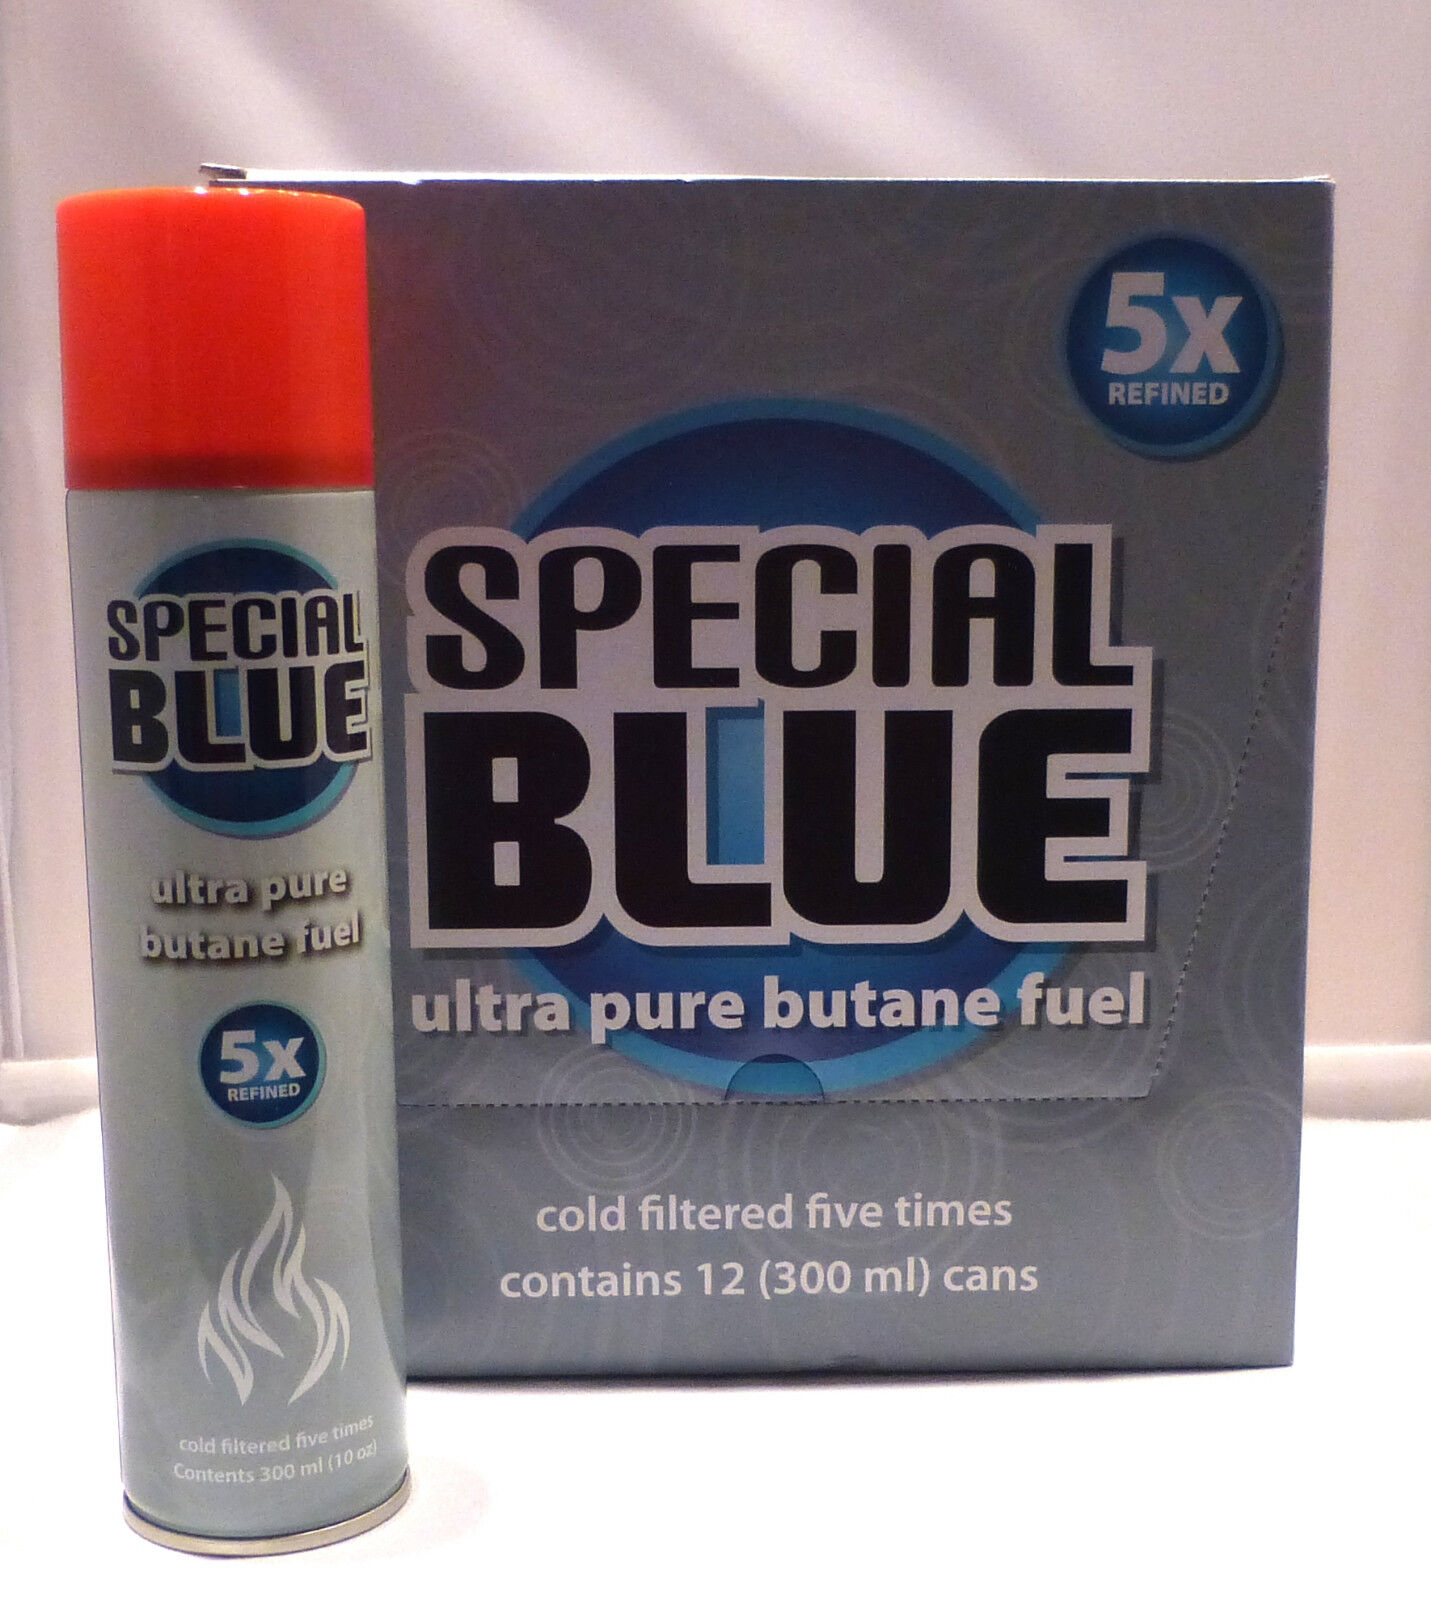 96 Cans - Butane Gas Special Blue 5X refined. Lighter Refill Wholesale Fuel 